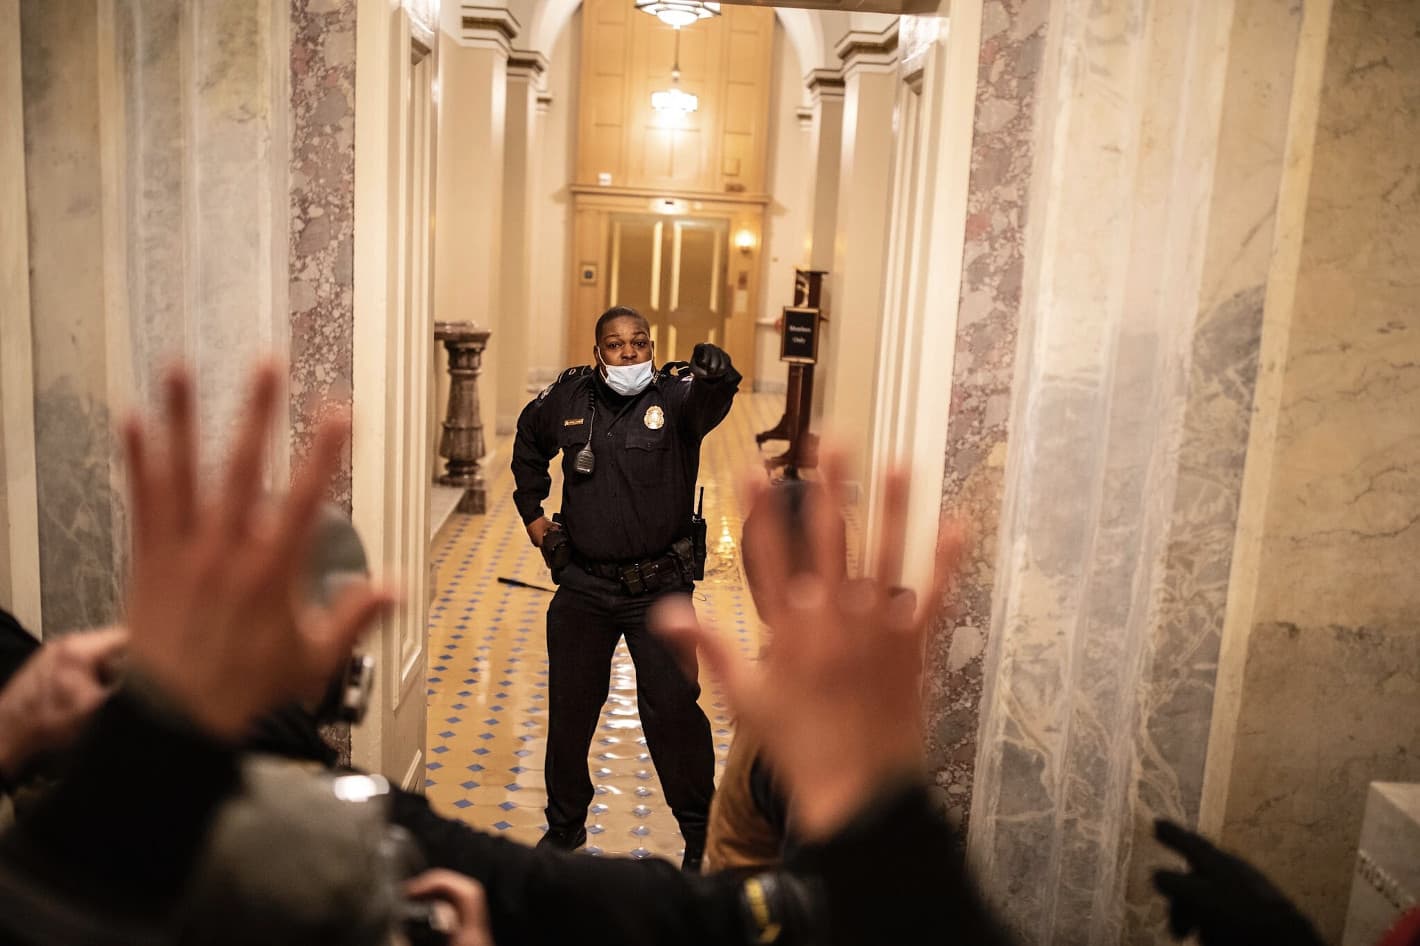 Officer Eugene Goodman facing down insurrectionists in the US Capitol invasion